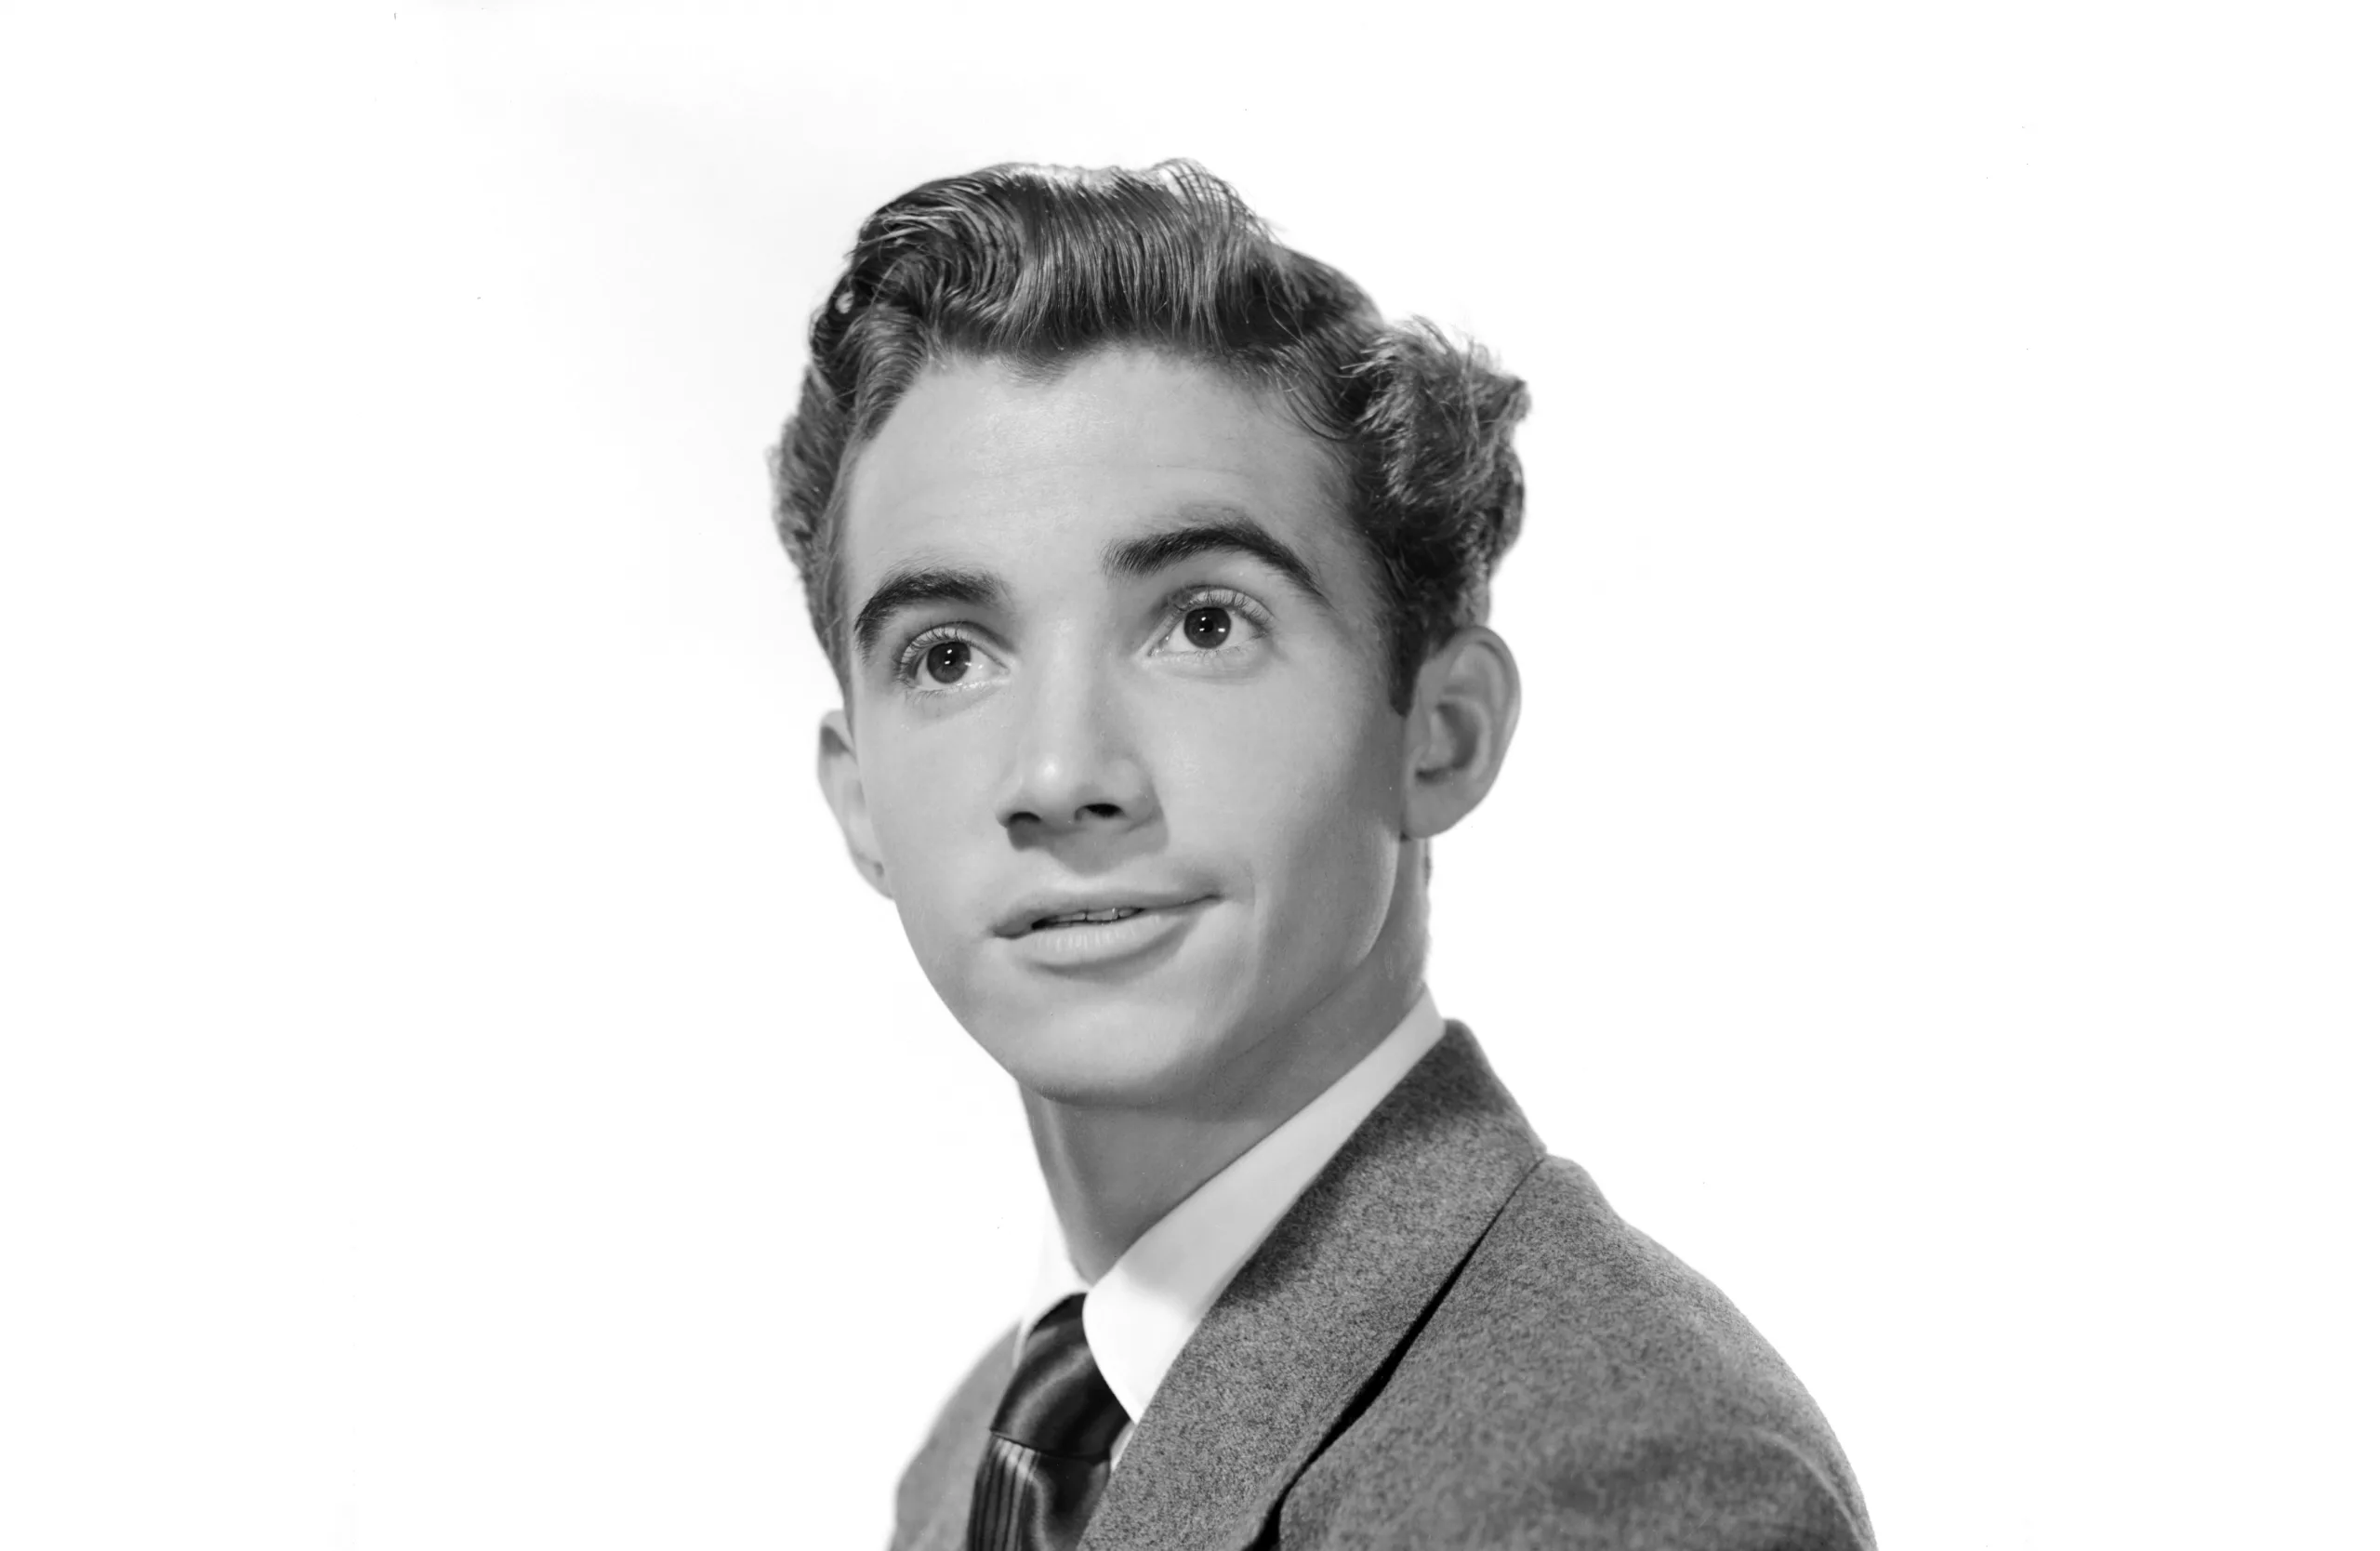 Scotty Beckett From Our Gang lived Post Gang after the Show ended, and was found dead in 1968 at age 38!